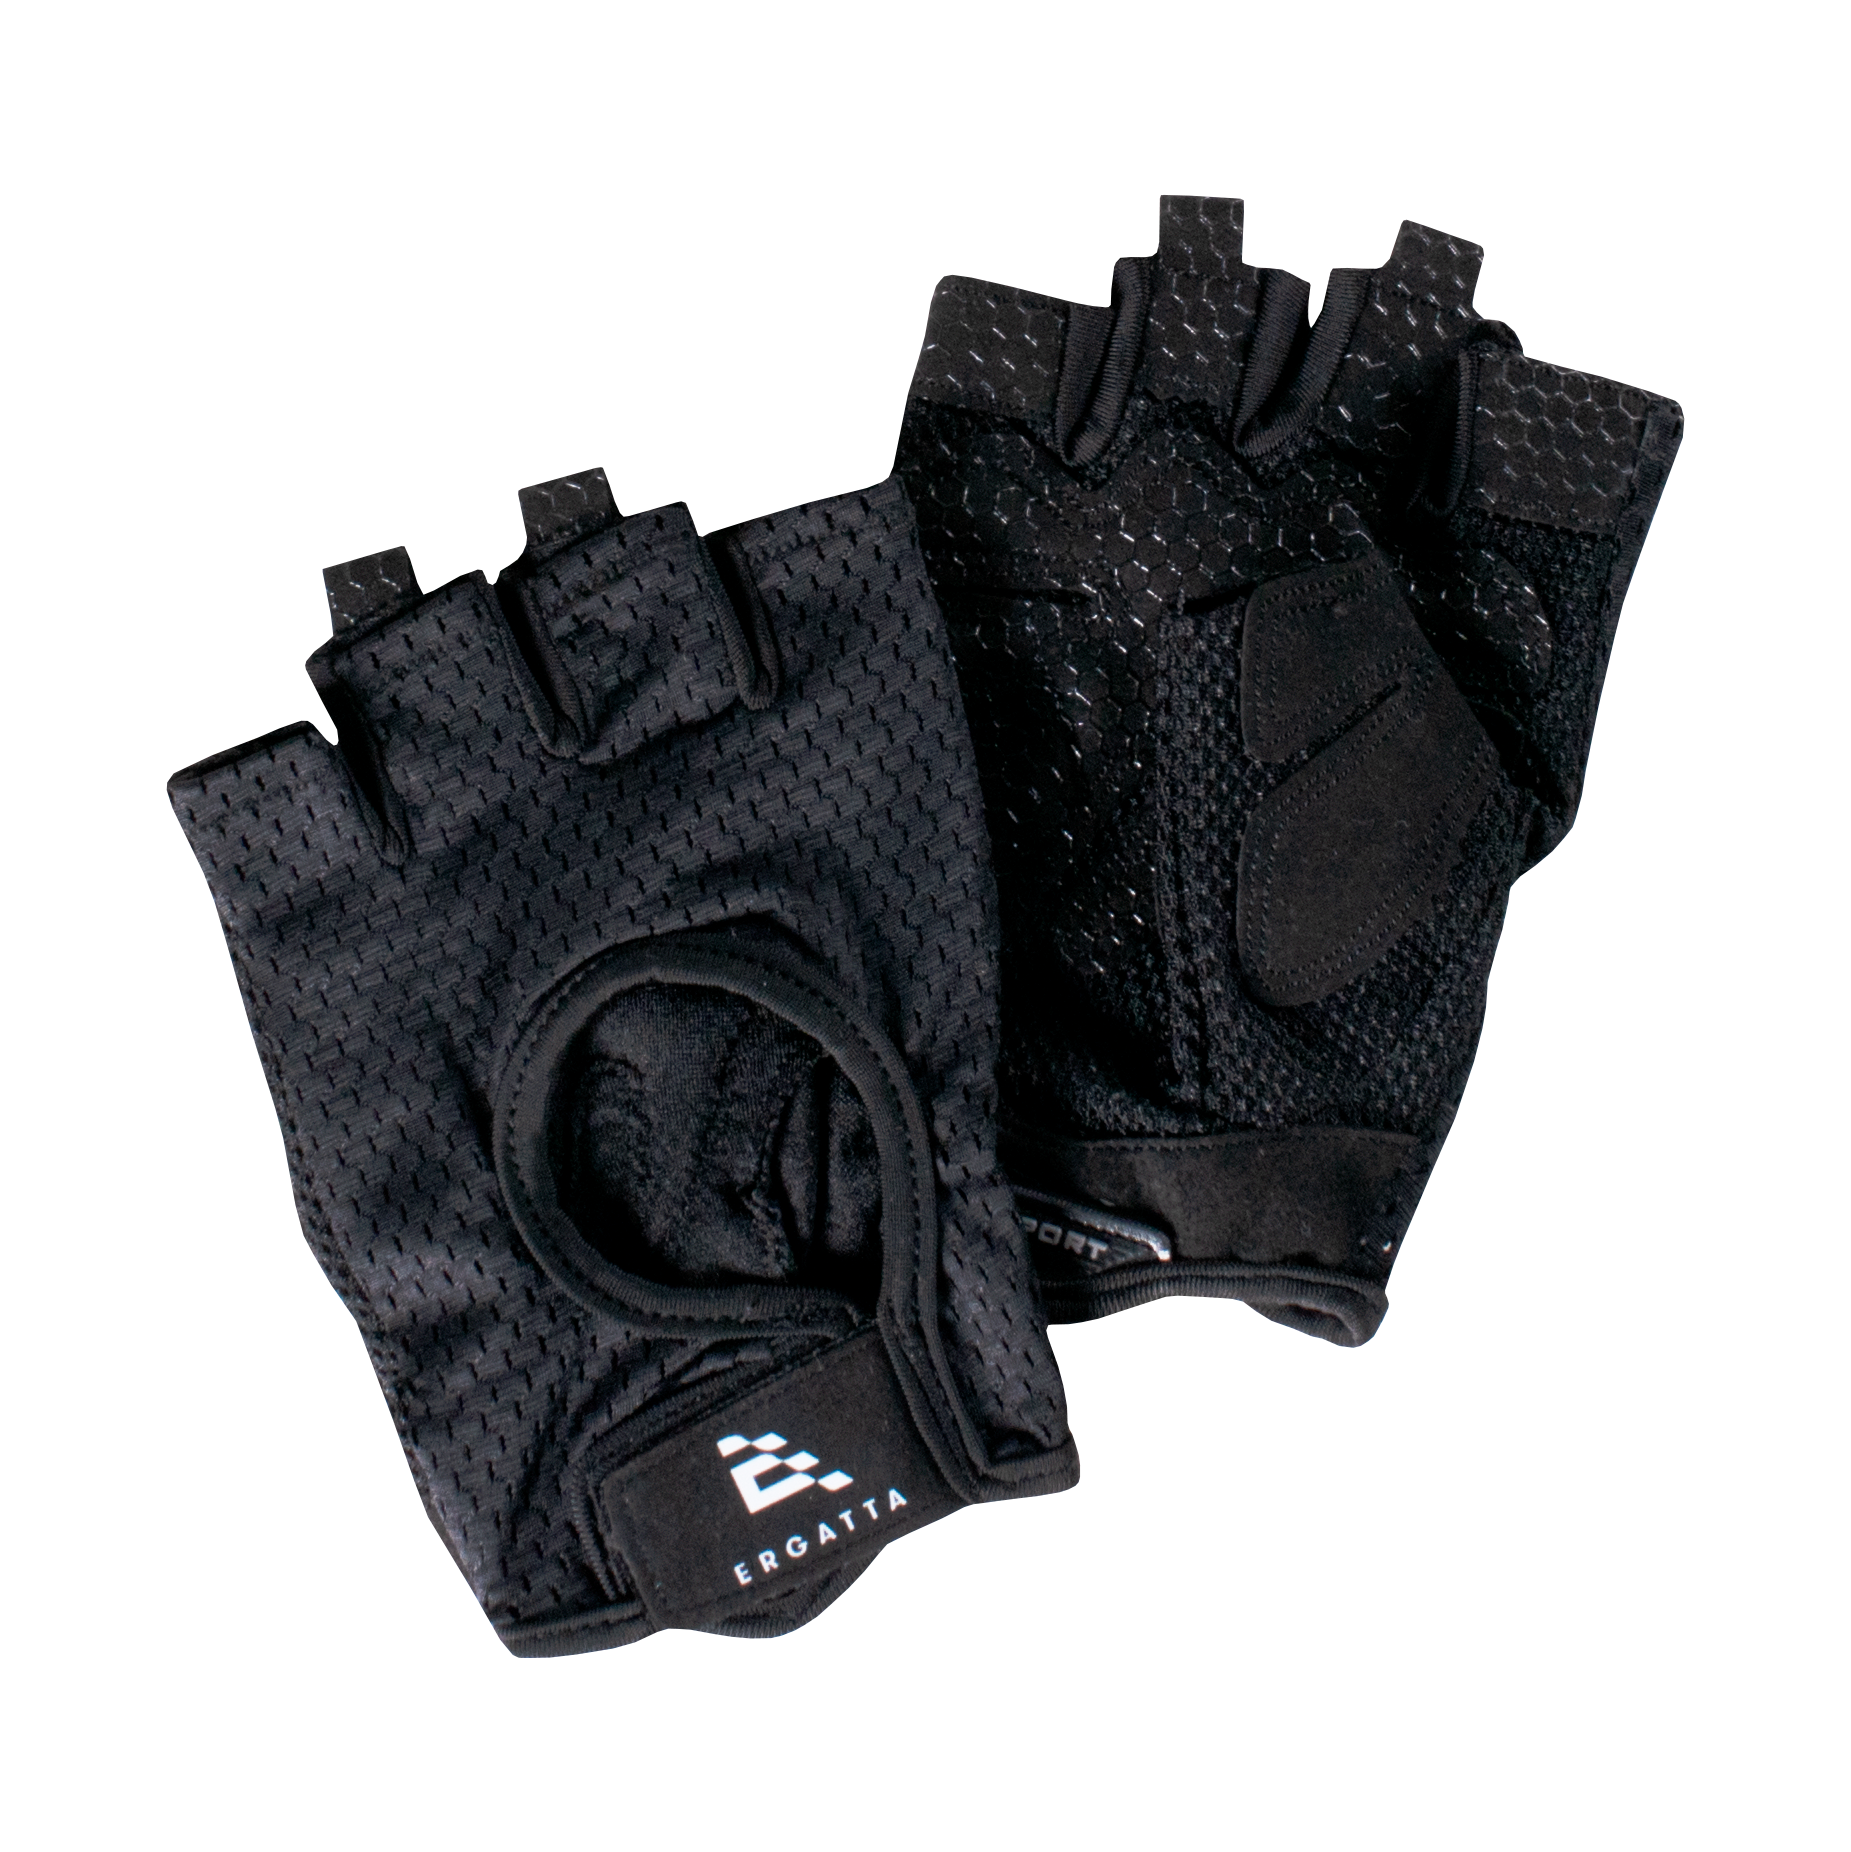 Rowing gloves with Ergatta logo on strap